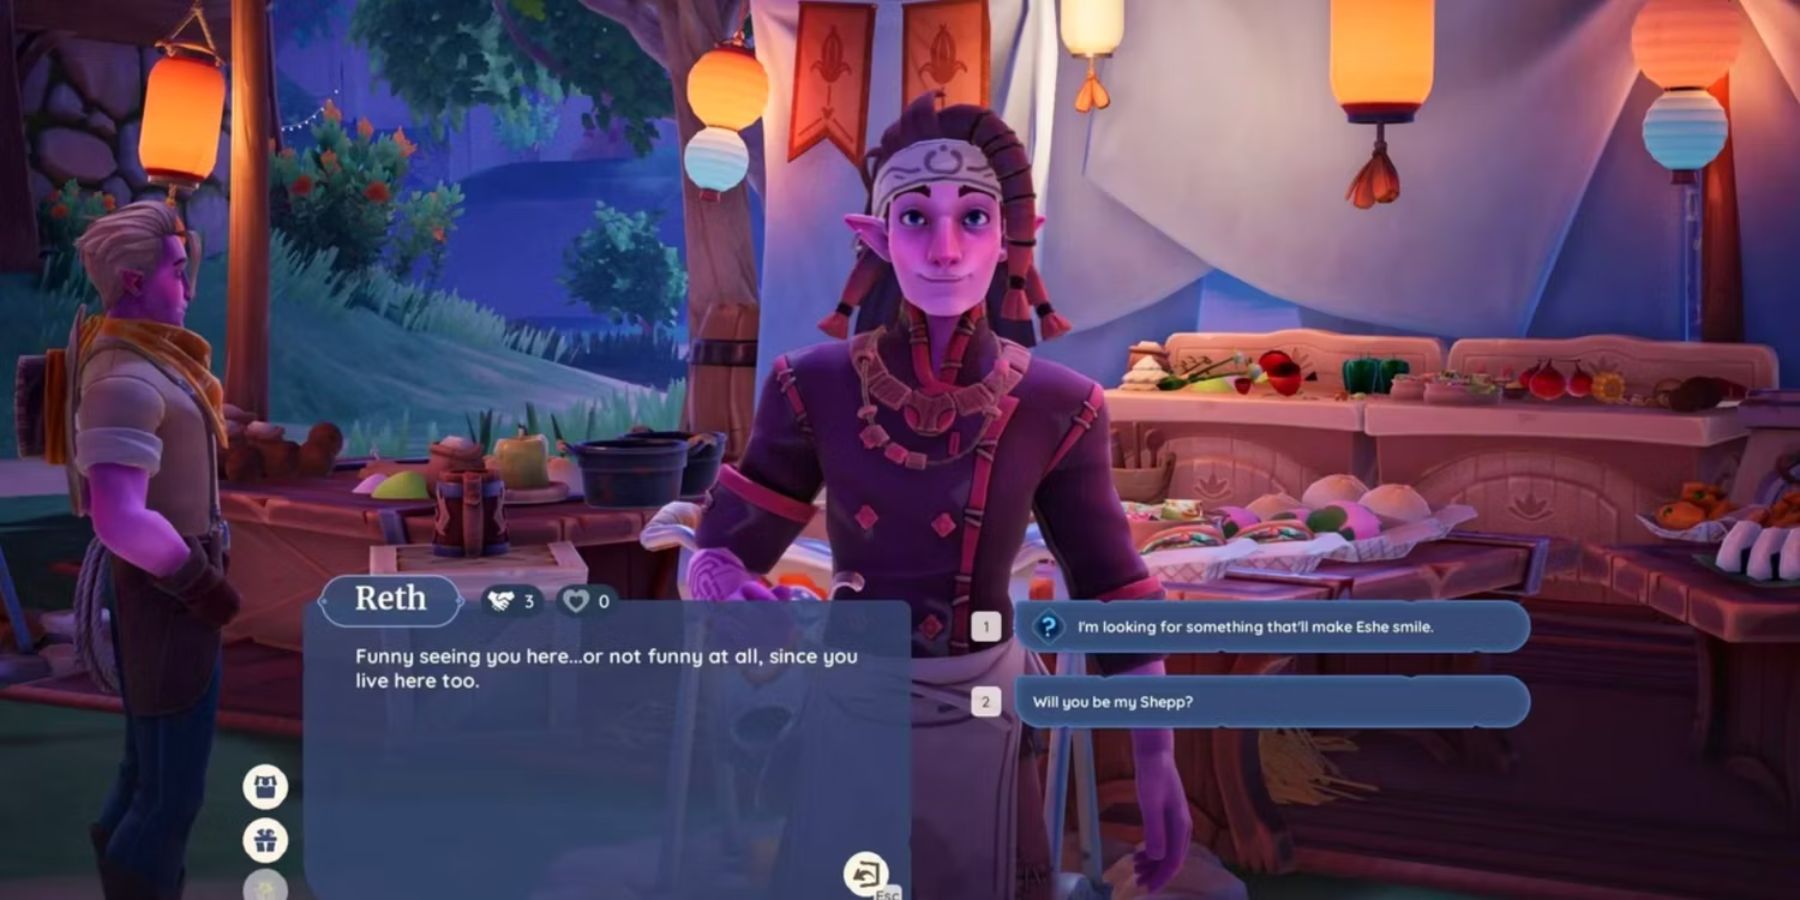 Reth, an NPC from Palia engaged in dialogue with the player